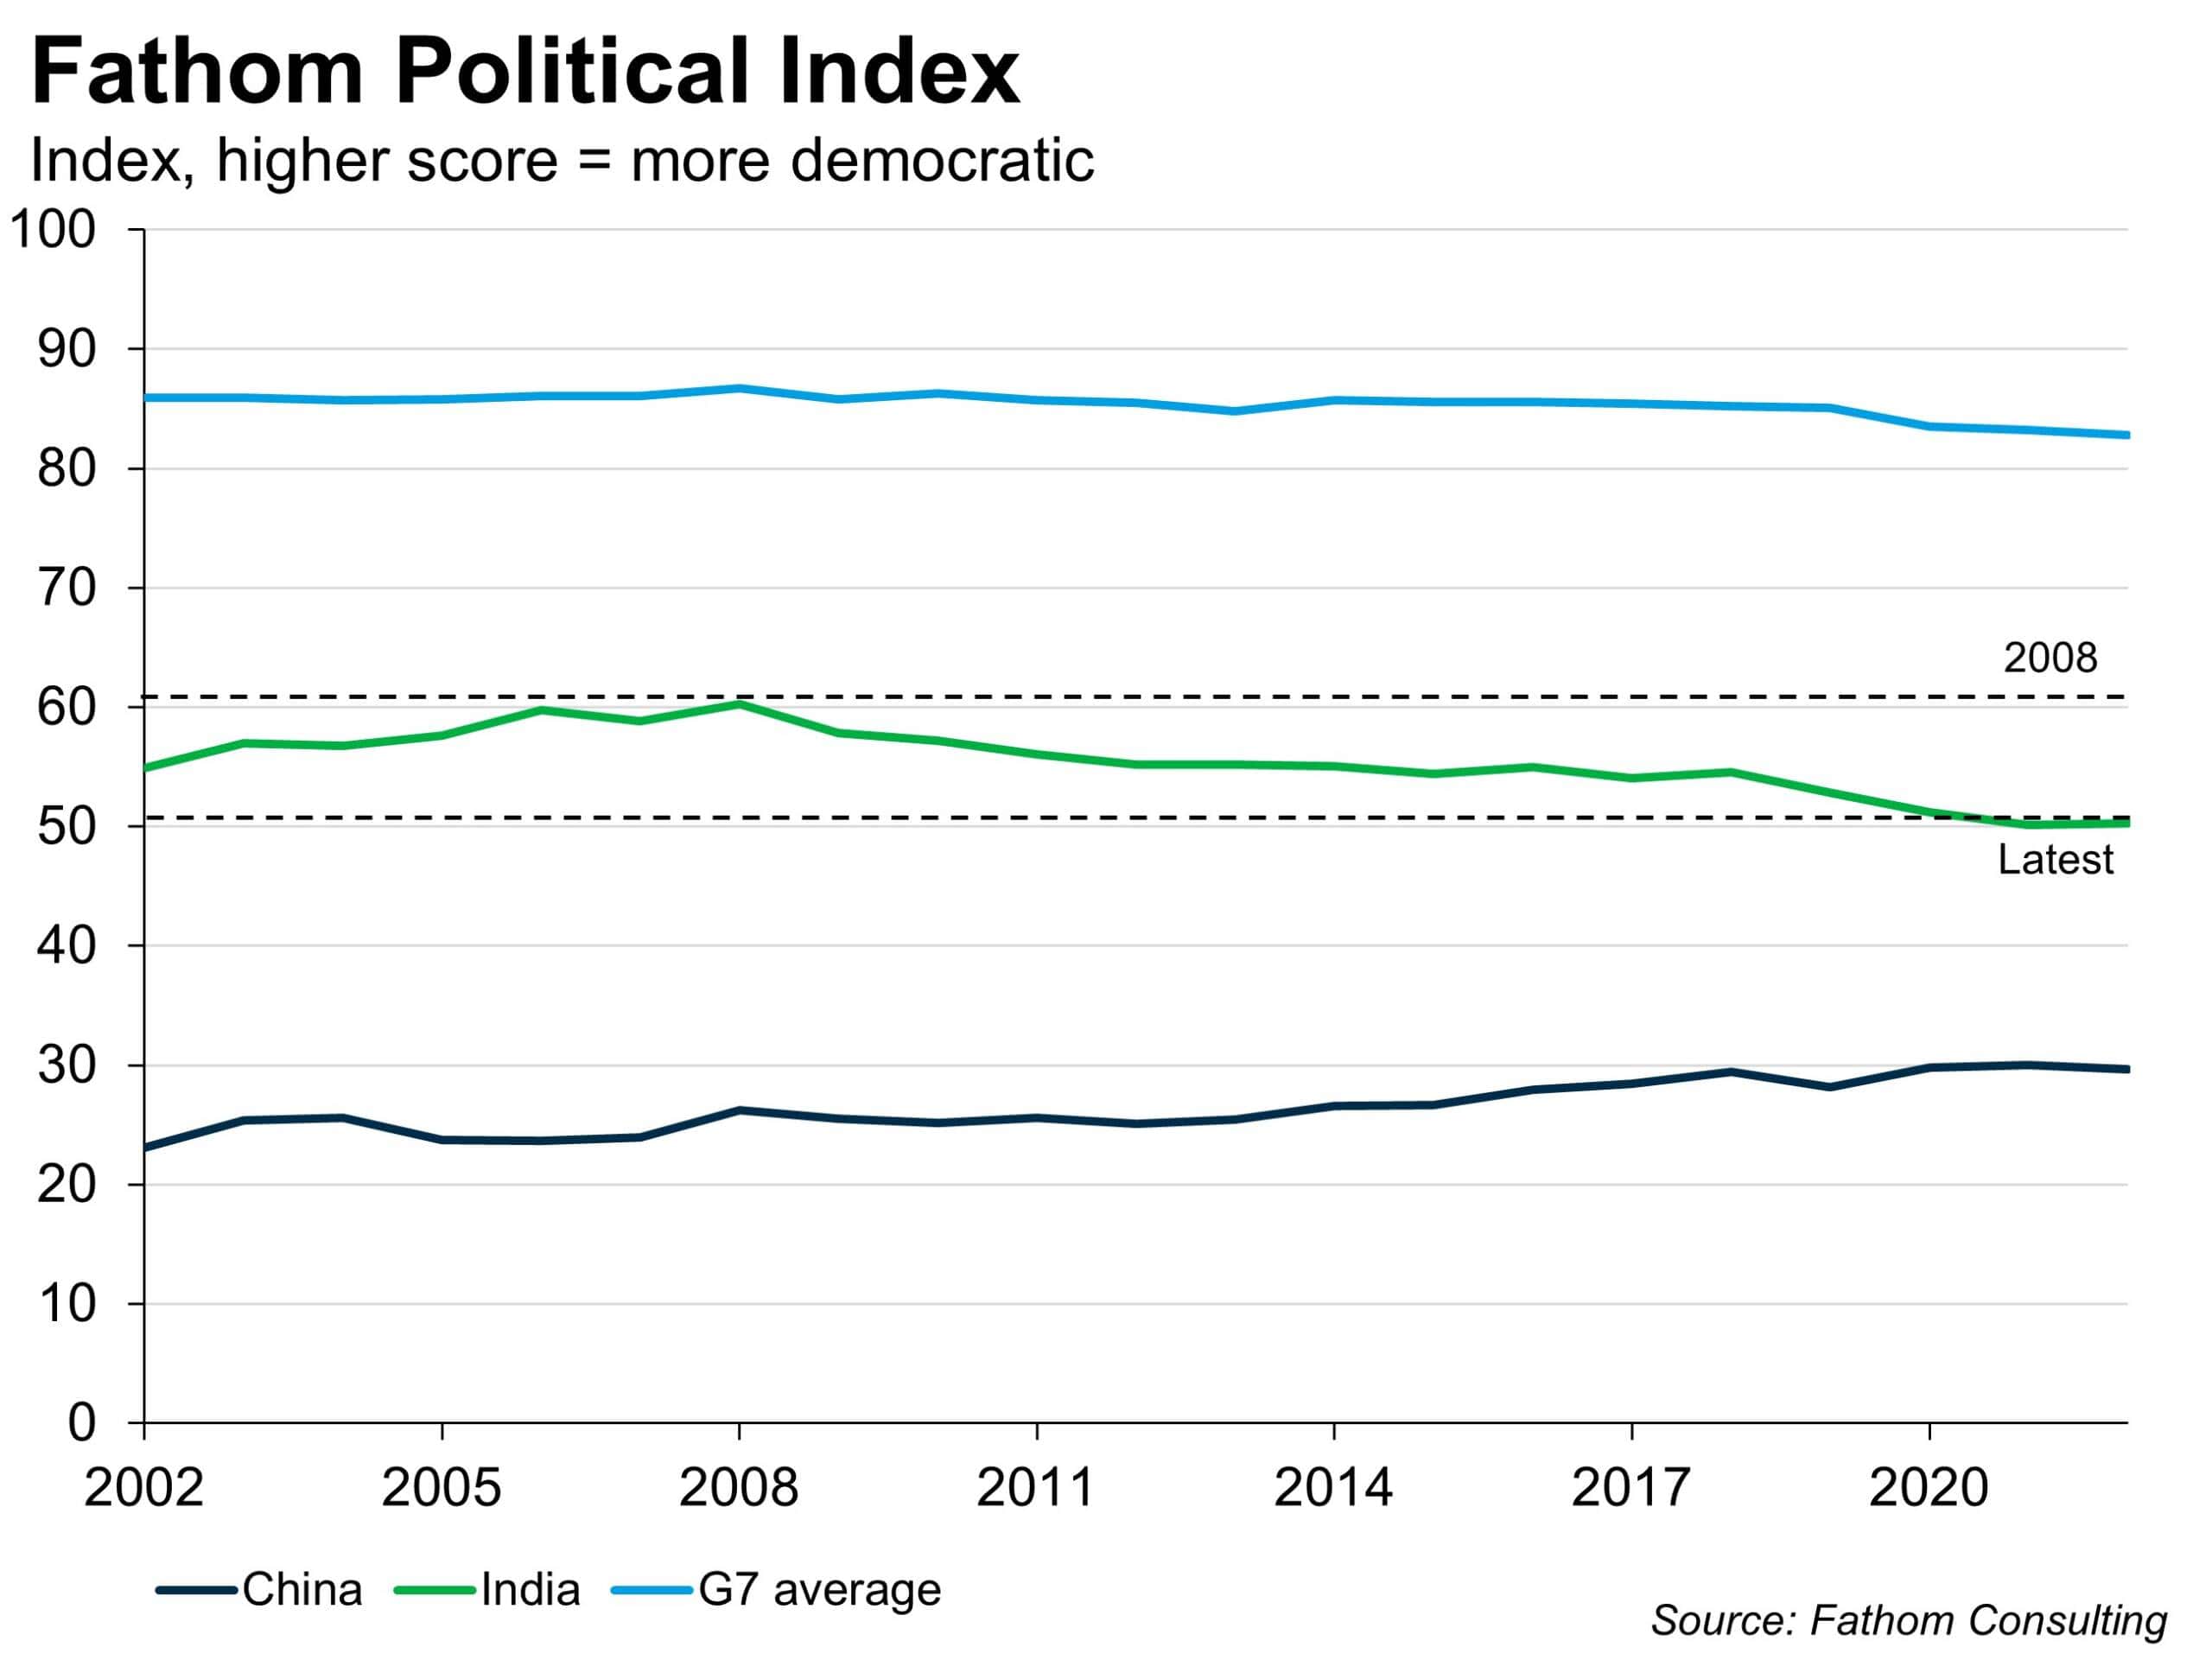 Fathom Political Index, with G7 average, India and China indicating the score in relation to their democratic level, from 2002 to recent 